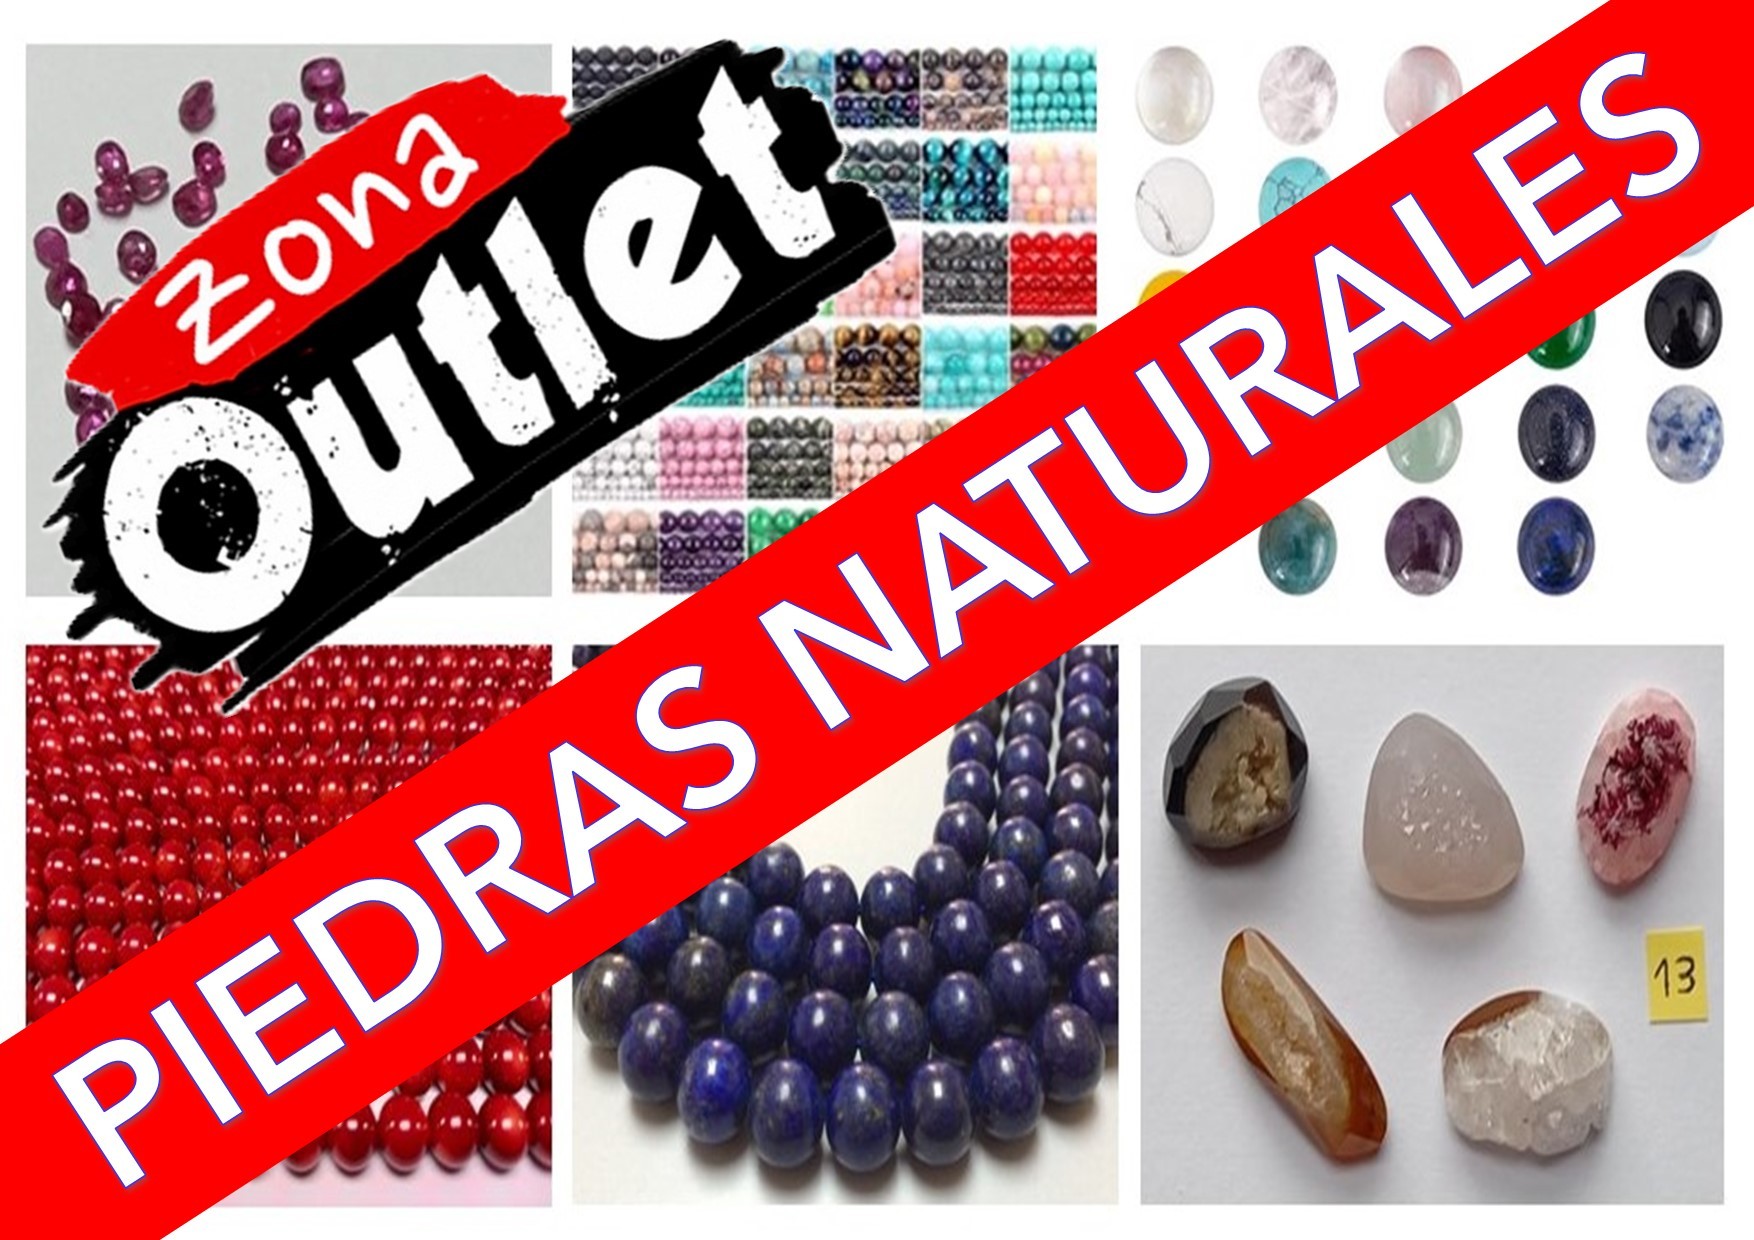 OUTLET PIEDRAS NATURALES